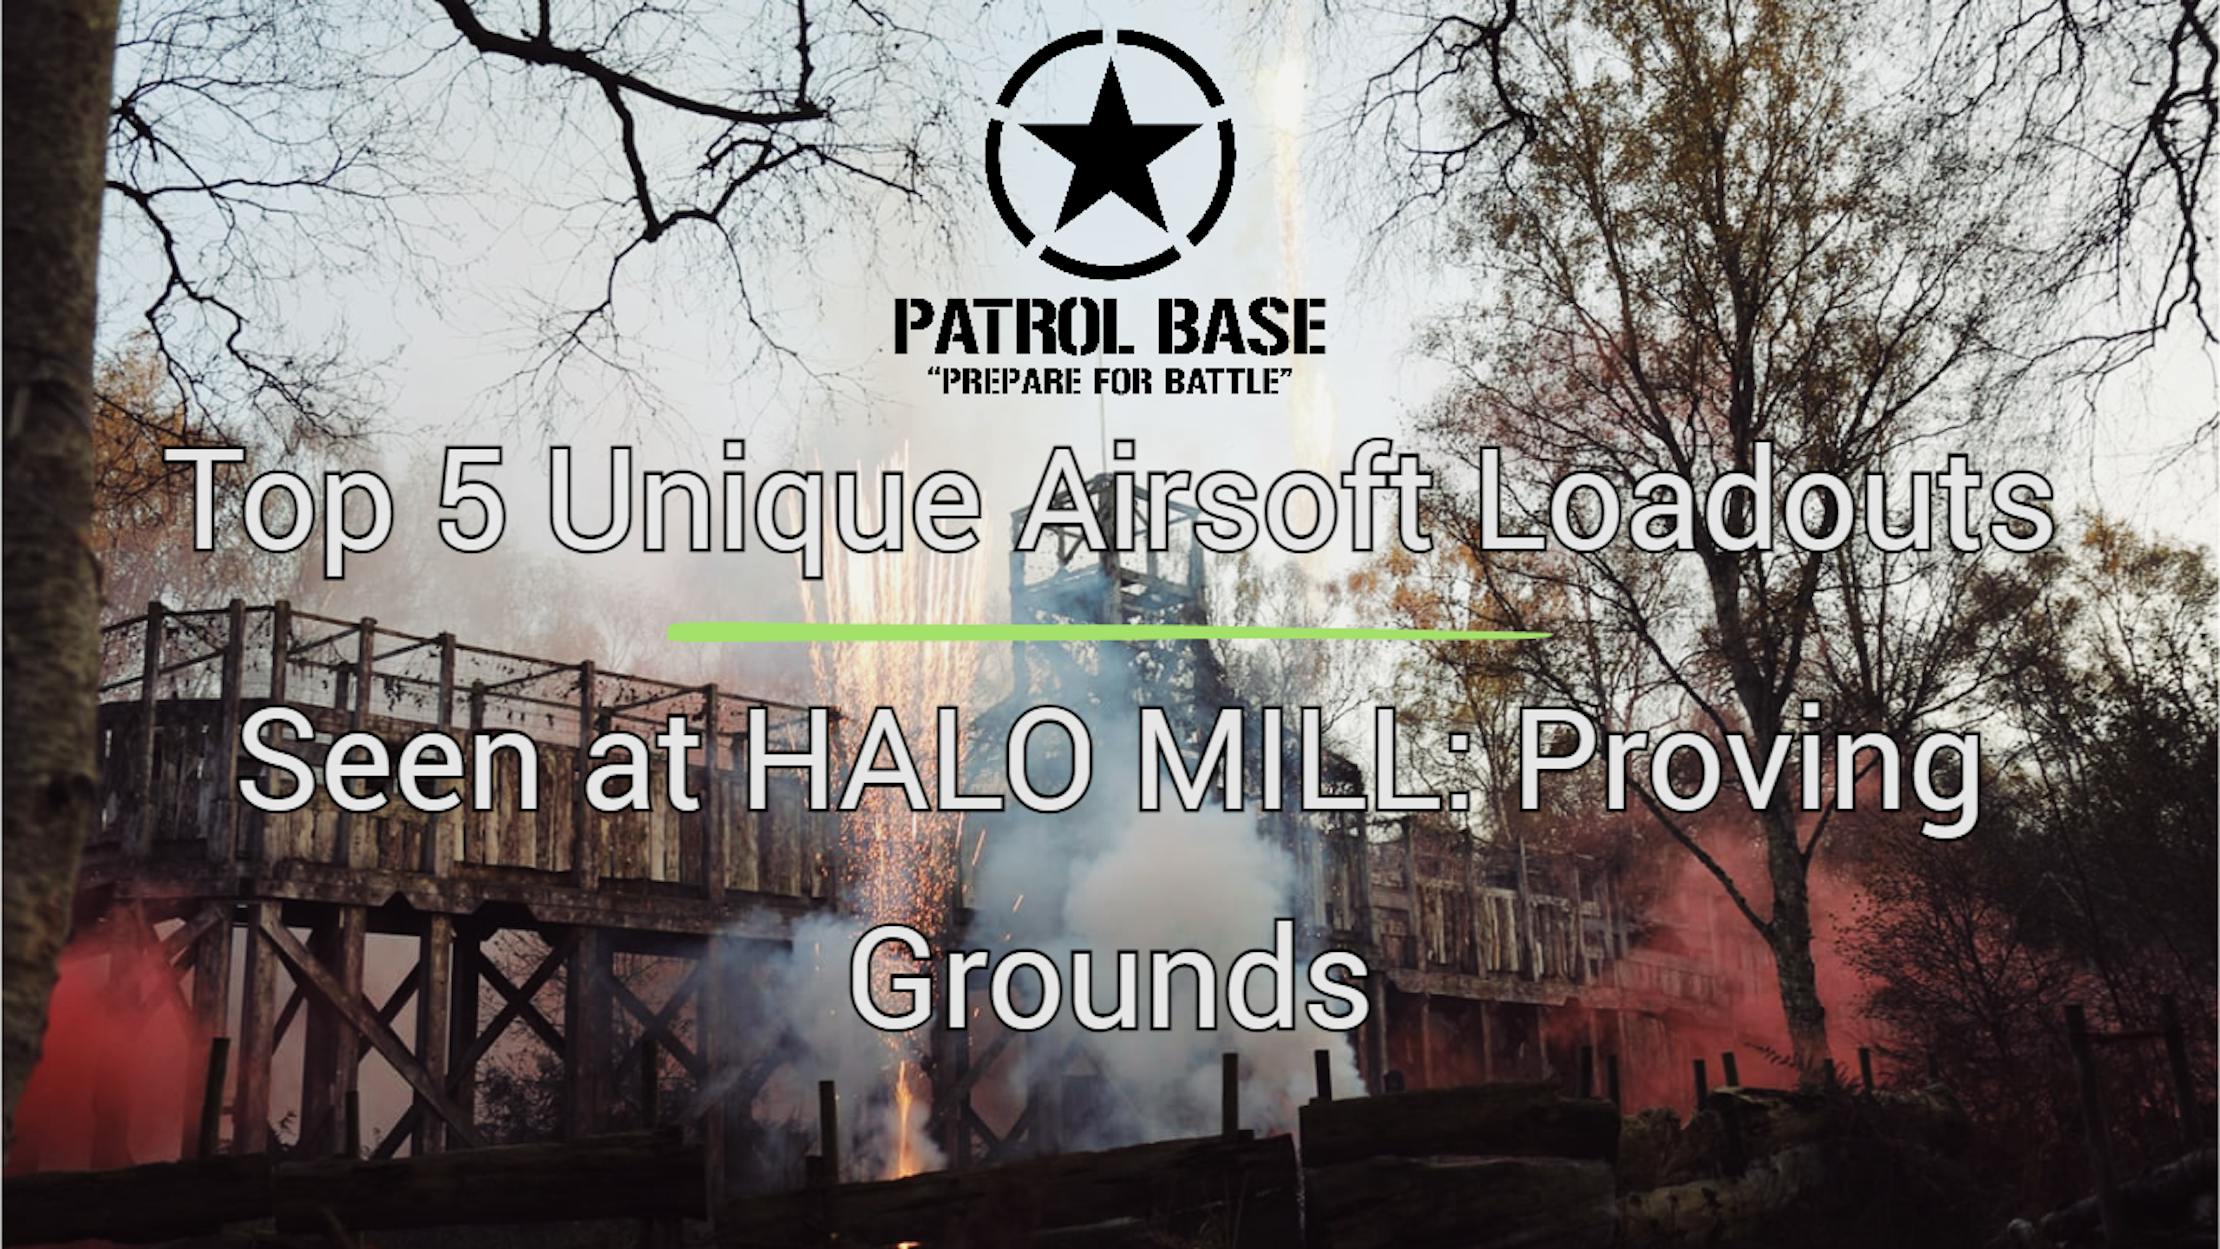 Top 5 Airsoft Loadouts at HALO MILL: Proving Grounds | Patrol Base UK